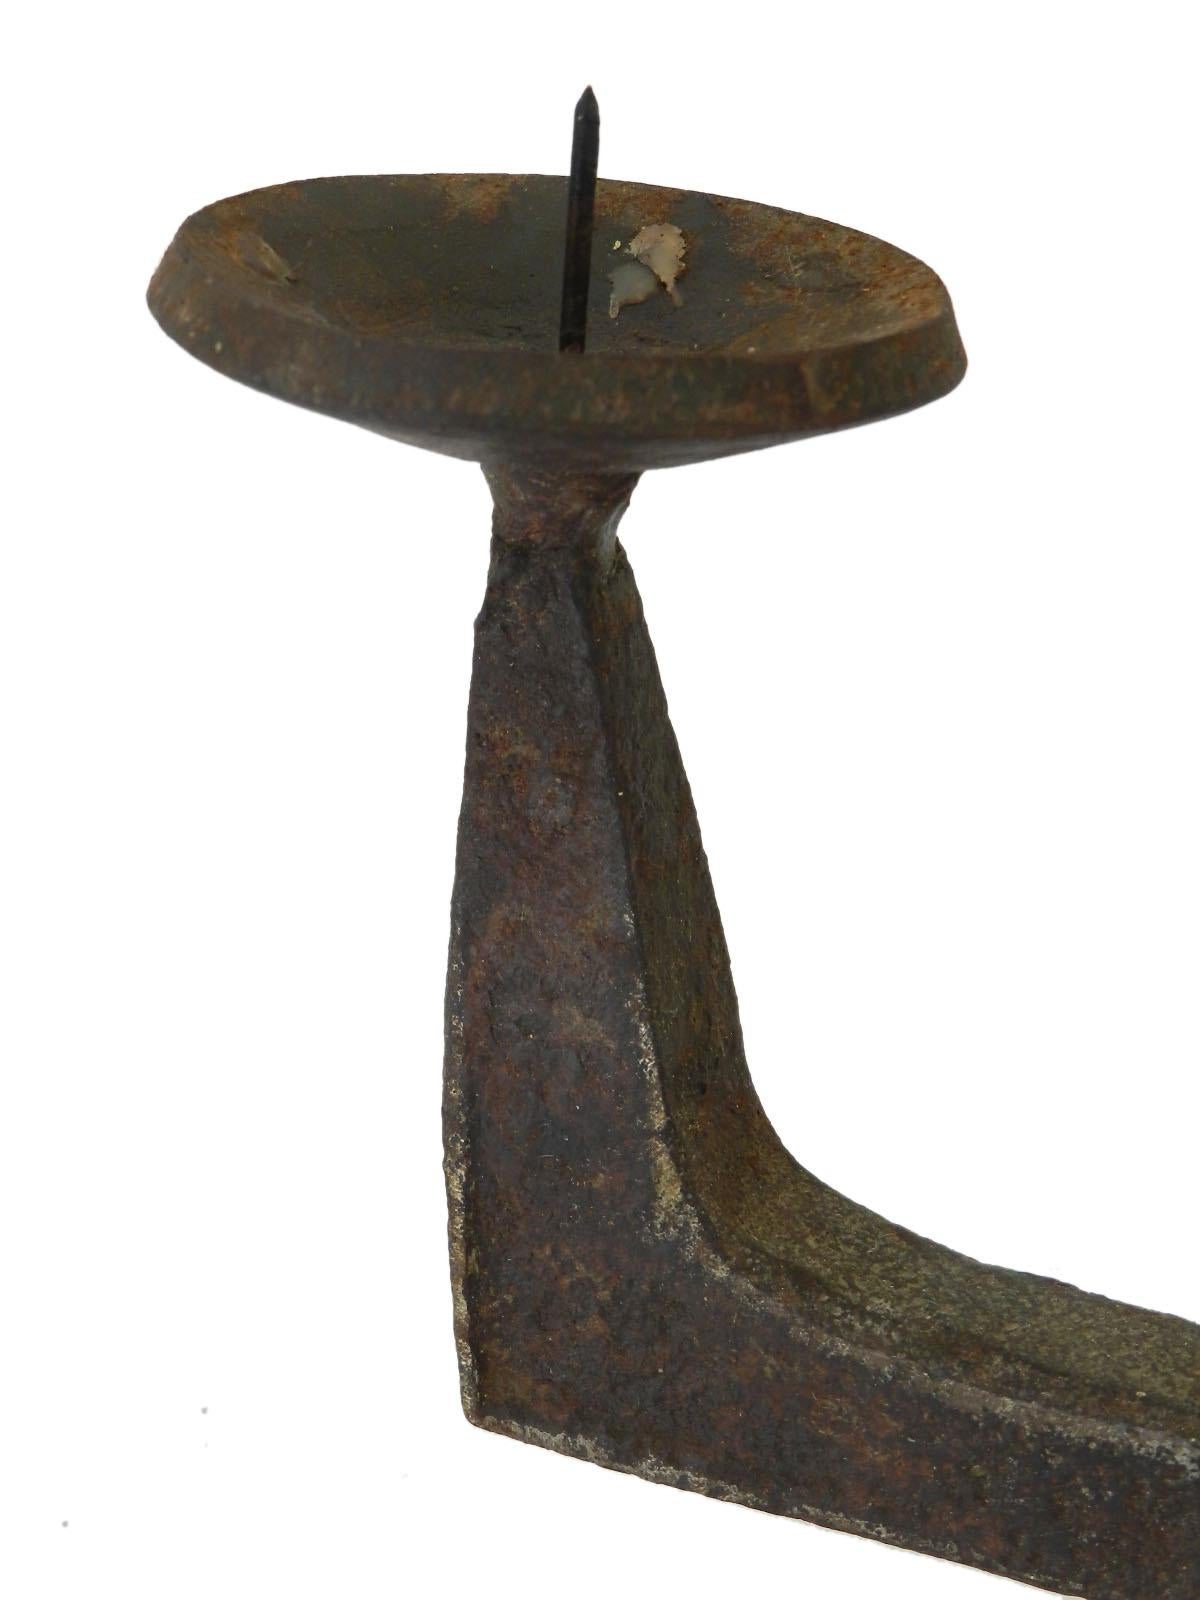 Forged Iron primitive candlestick brutalist, French, circa 1690
Great age patina
Simple French Provincial Folk Art
Good antique condition with some small remains of wax in the bowls.





   